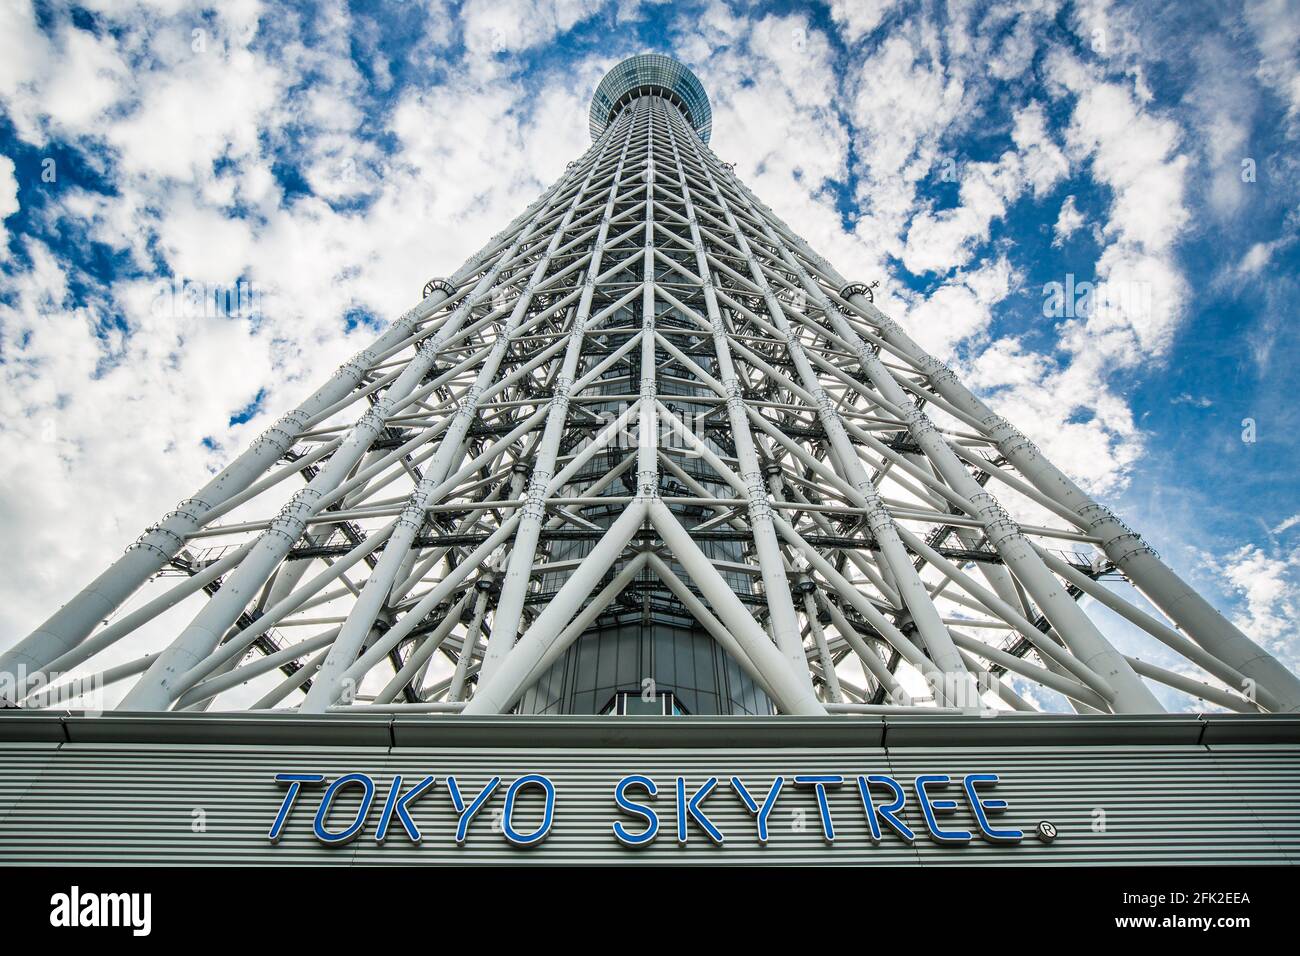 Tokyo Skytree, the tallest tower in the world. It is a broadcasting and observation structure in Sumida, Tokyo. Stock Photo